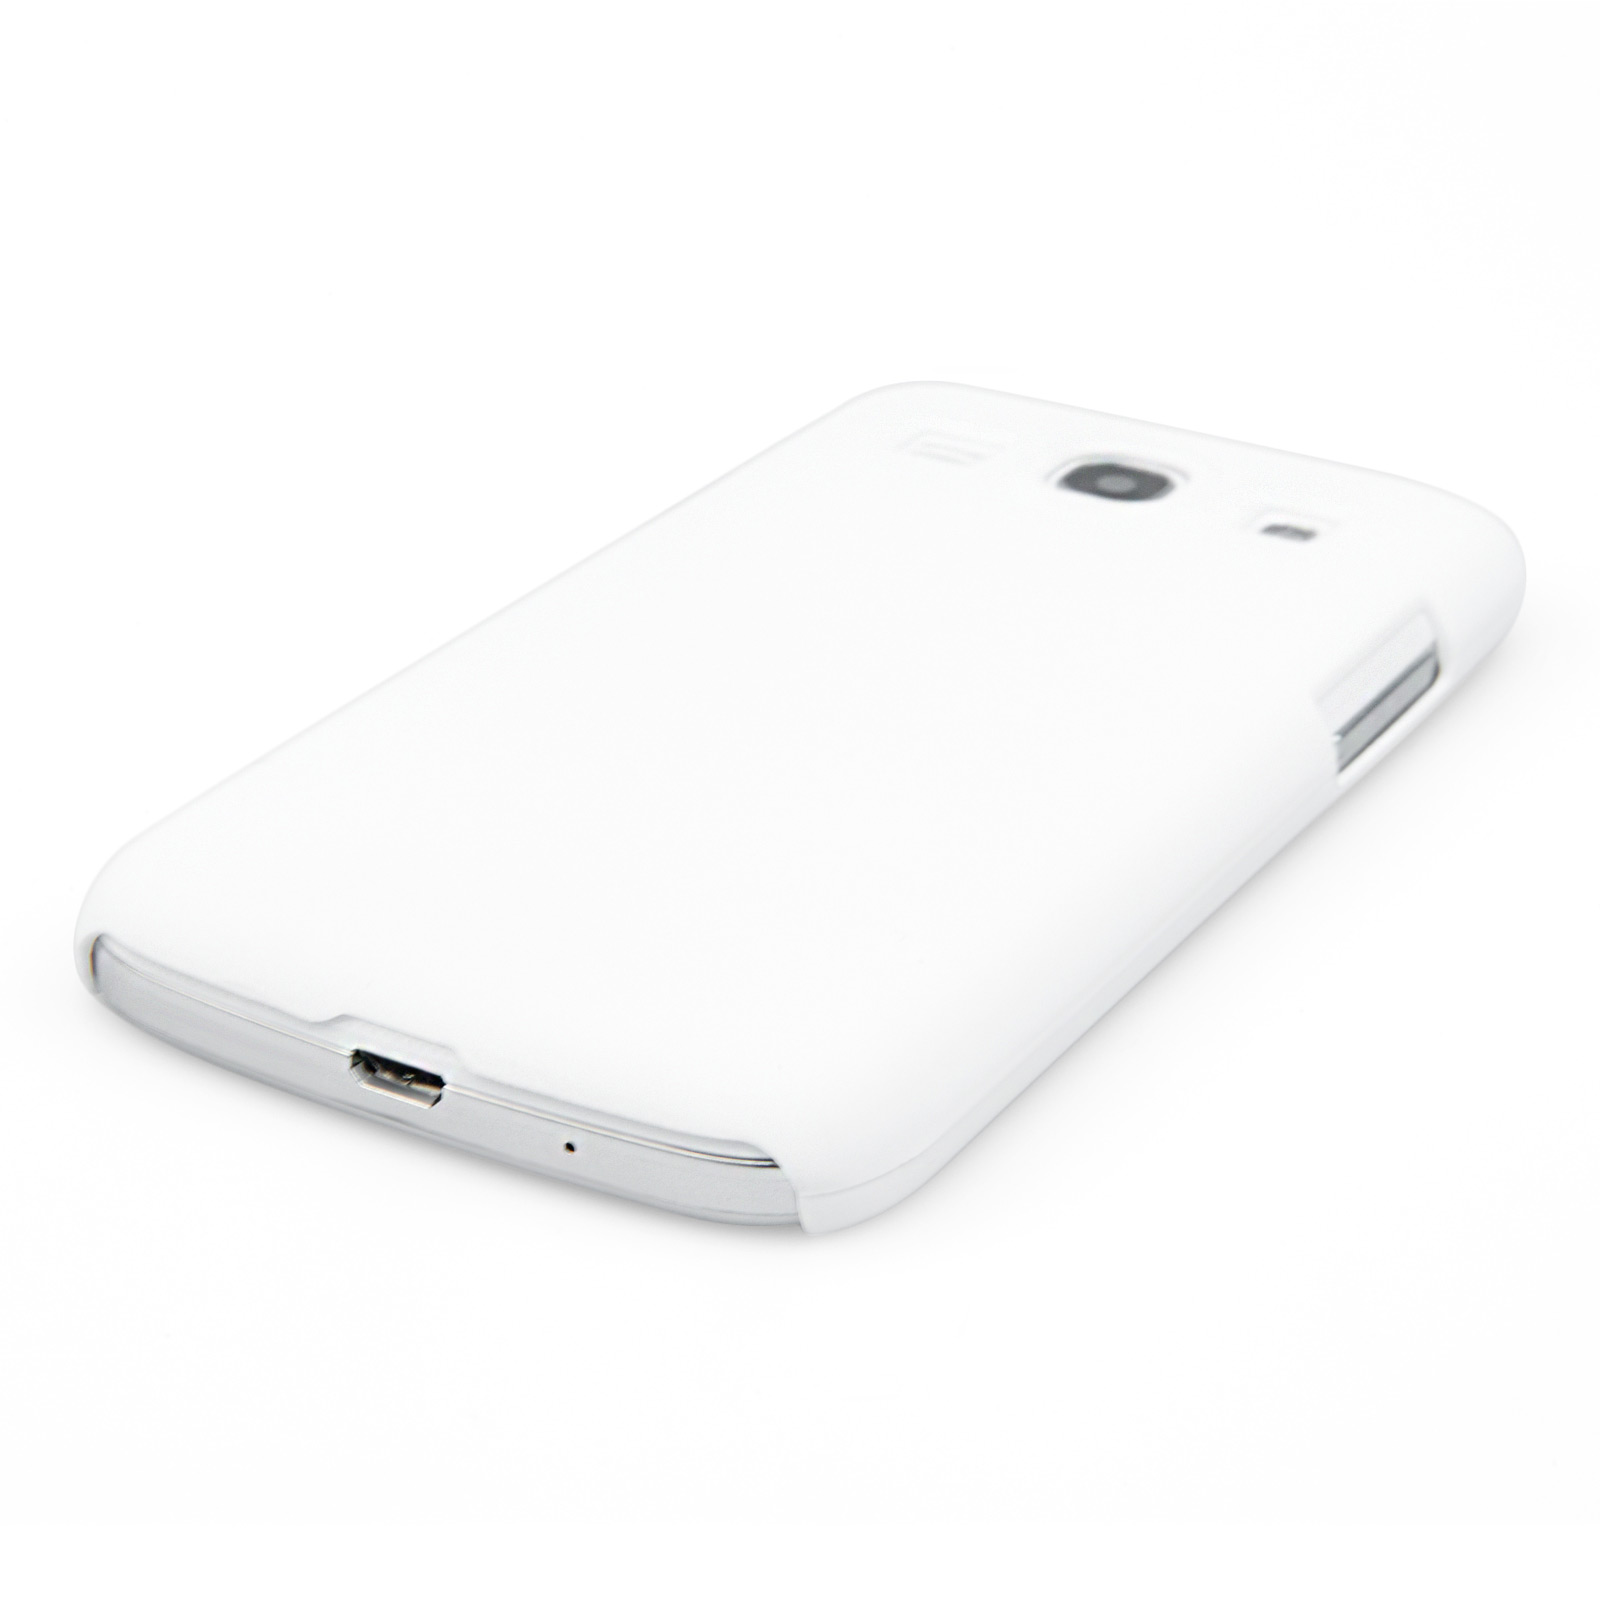 YouSave Accessories Samsung Galaxy Core Plus Hard Hybrid Case - White